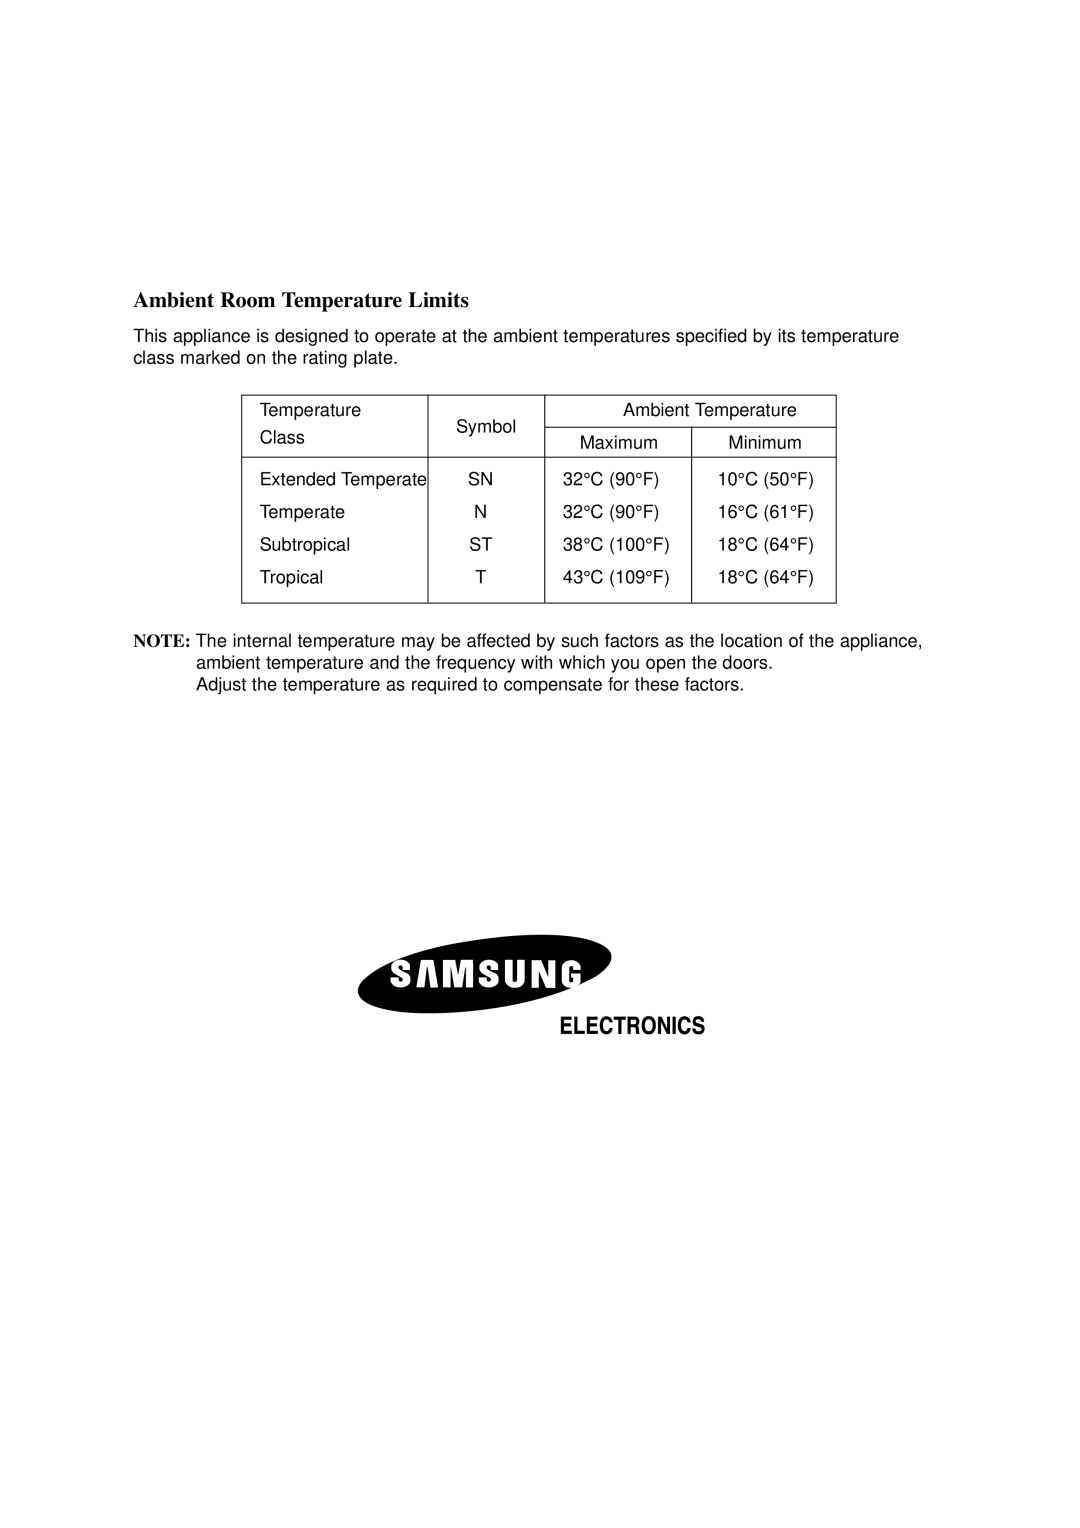 Samsung RS owner manual Ambient Room Temperature Limits 